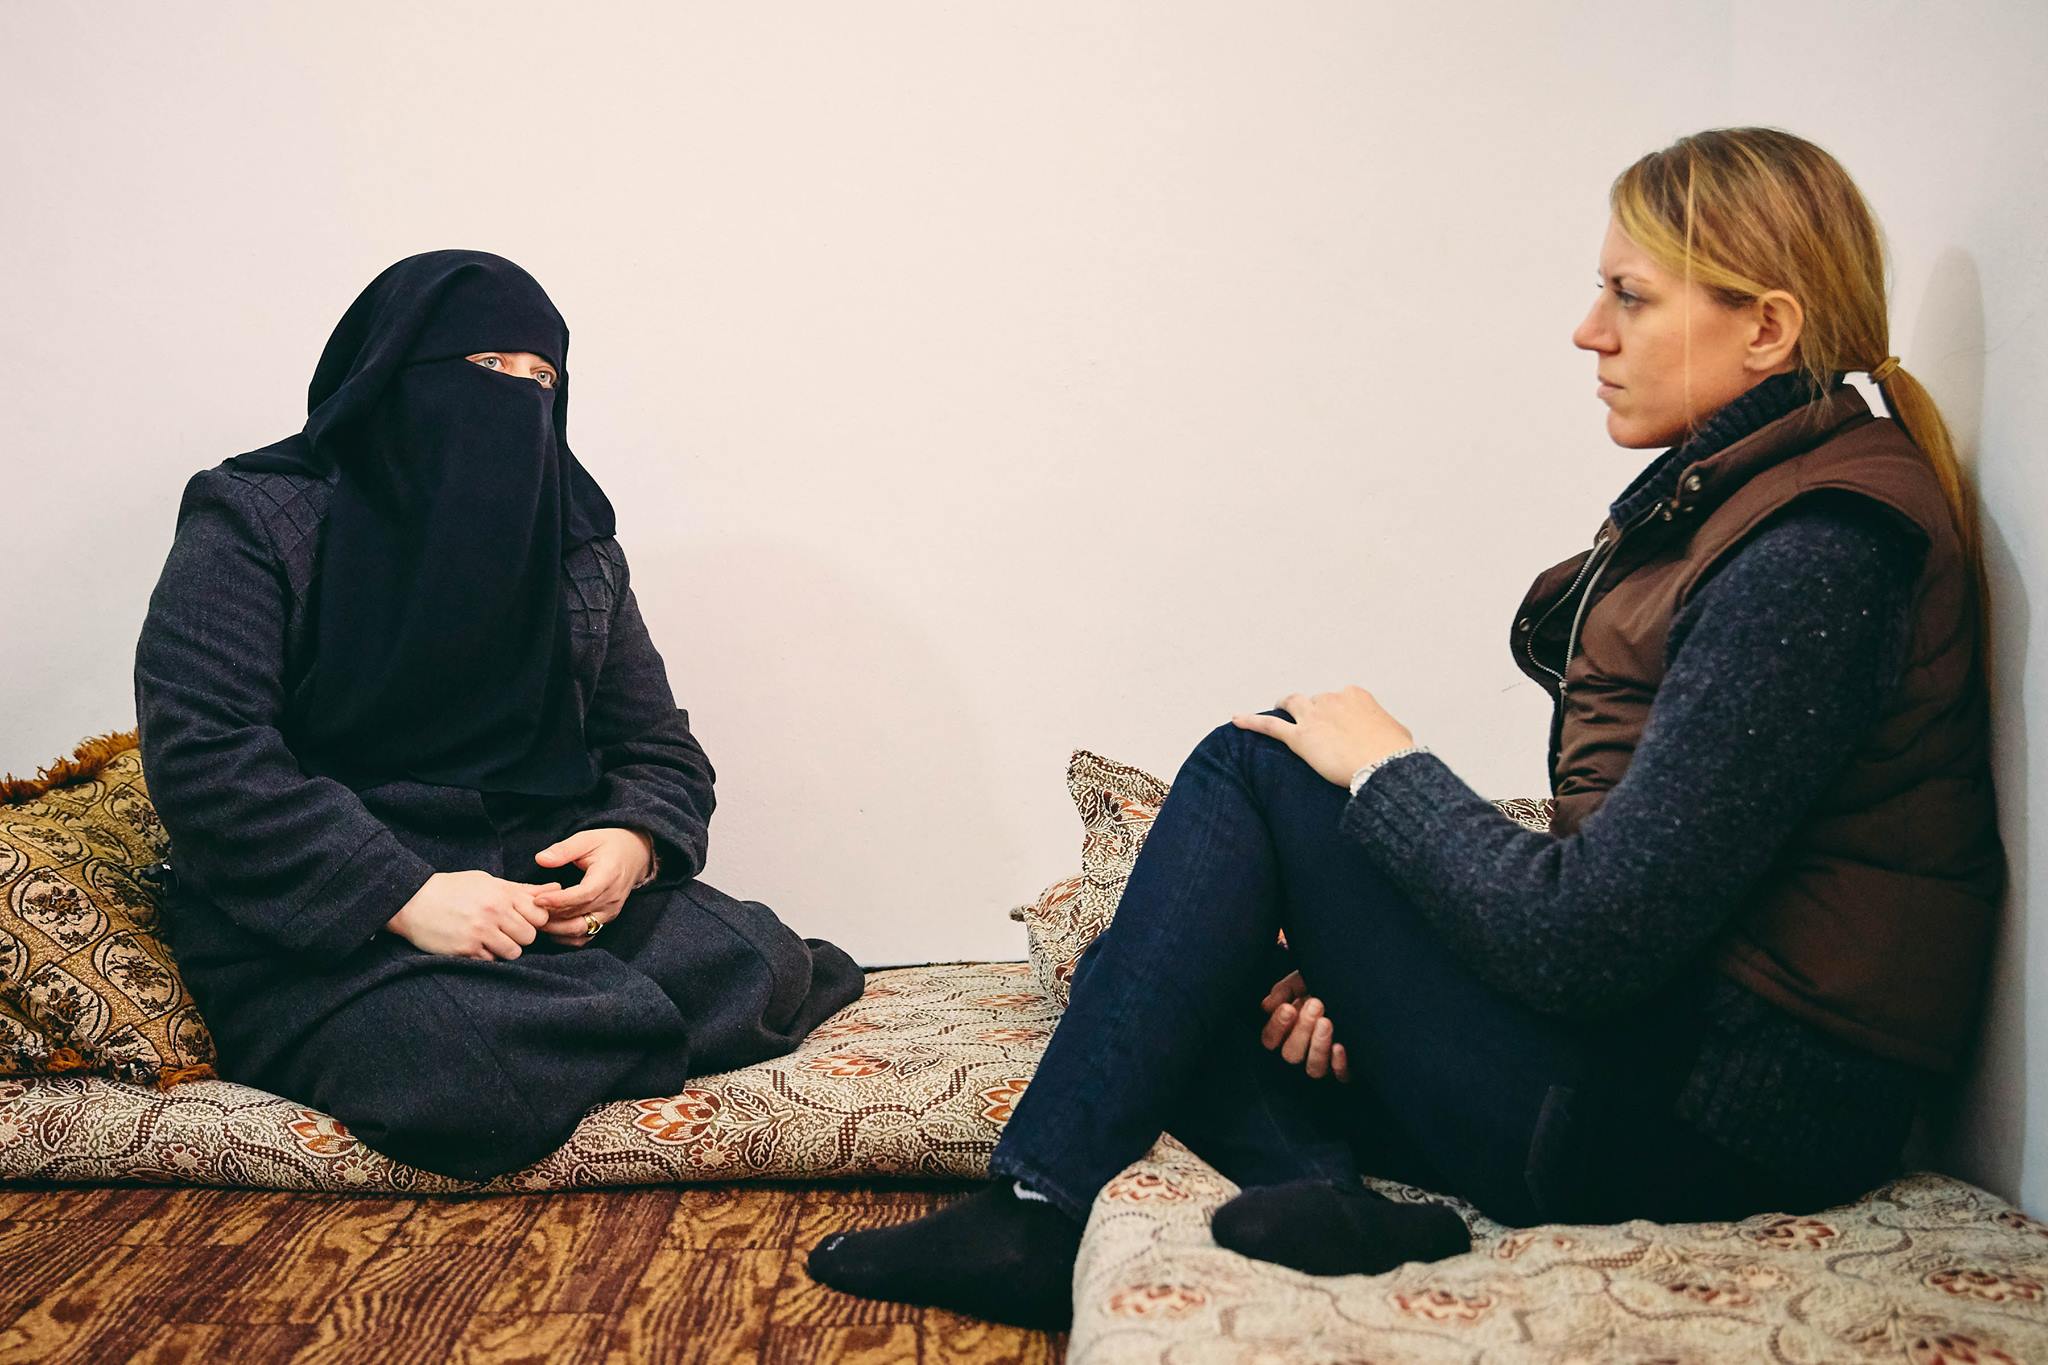 Diplomatic Language Services staff member talks with female Syrian refugee